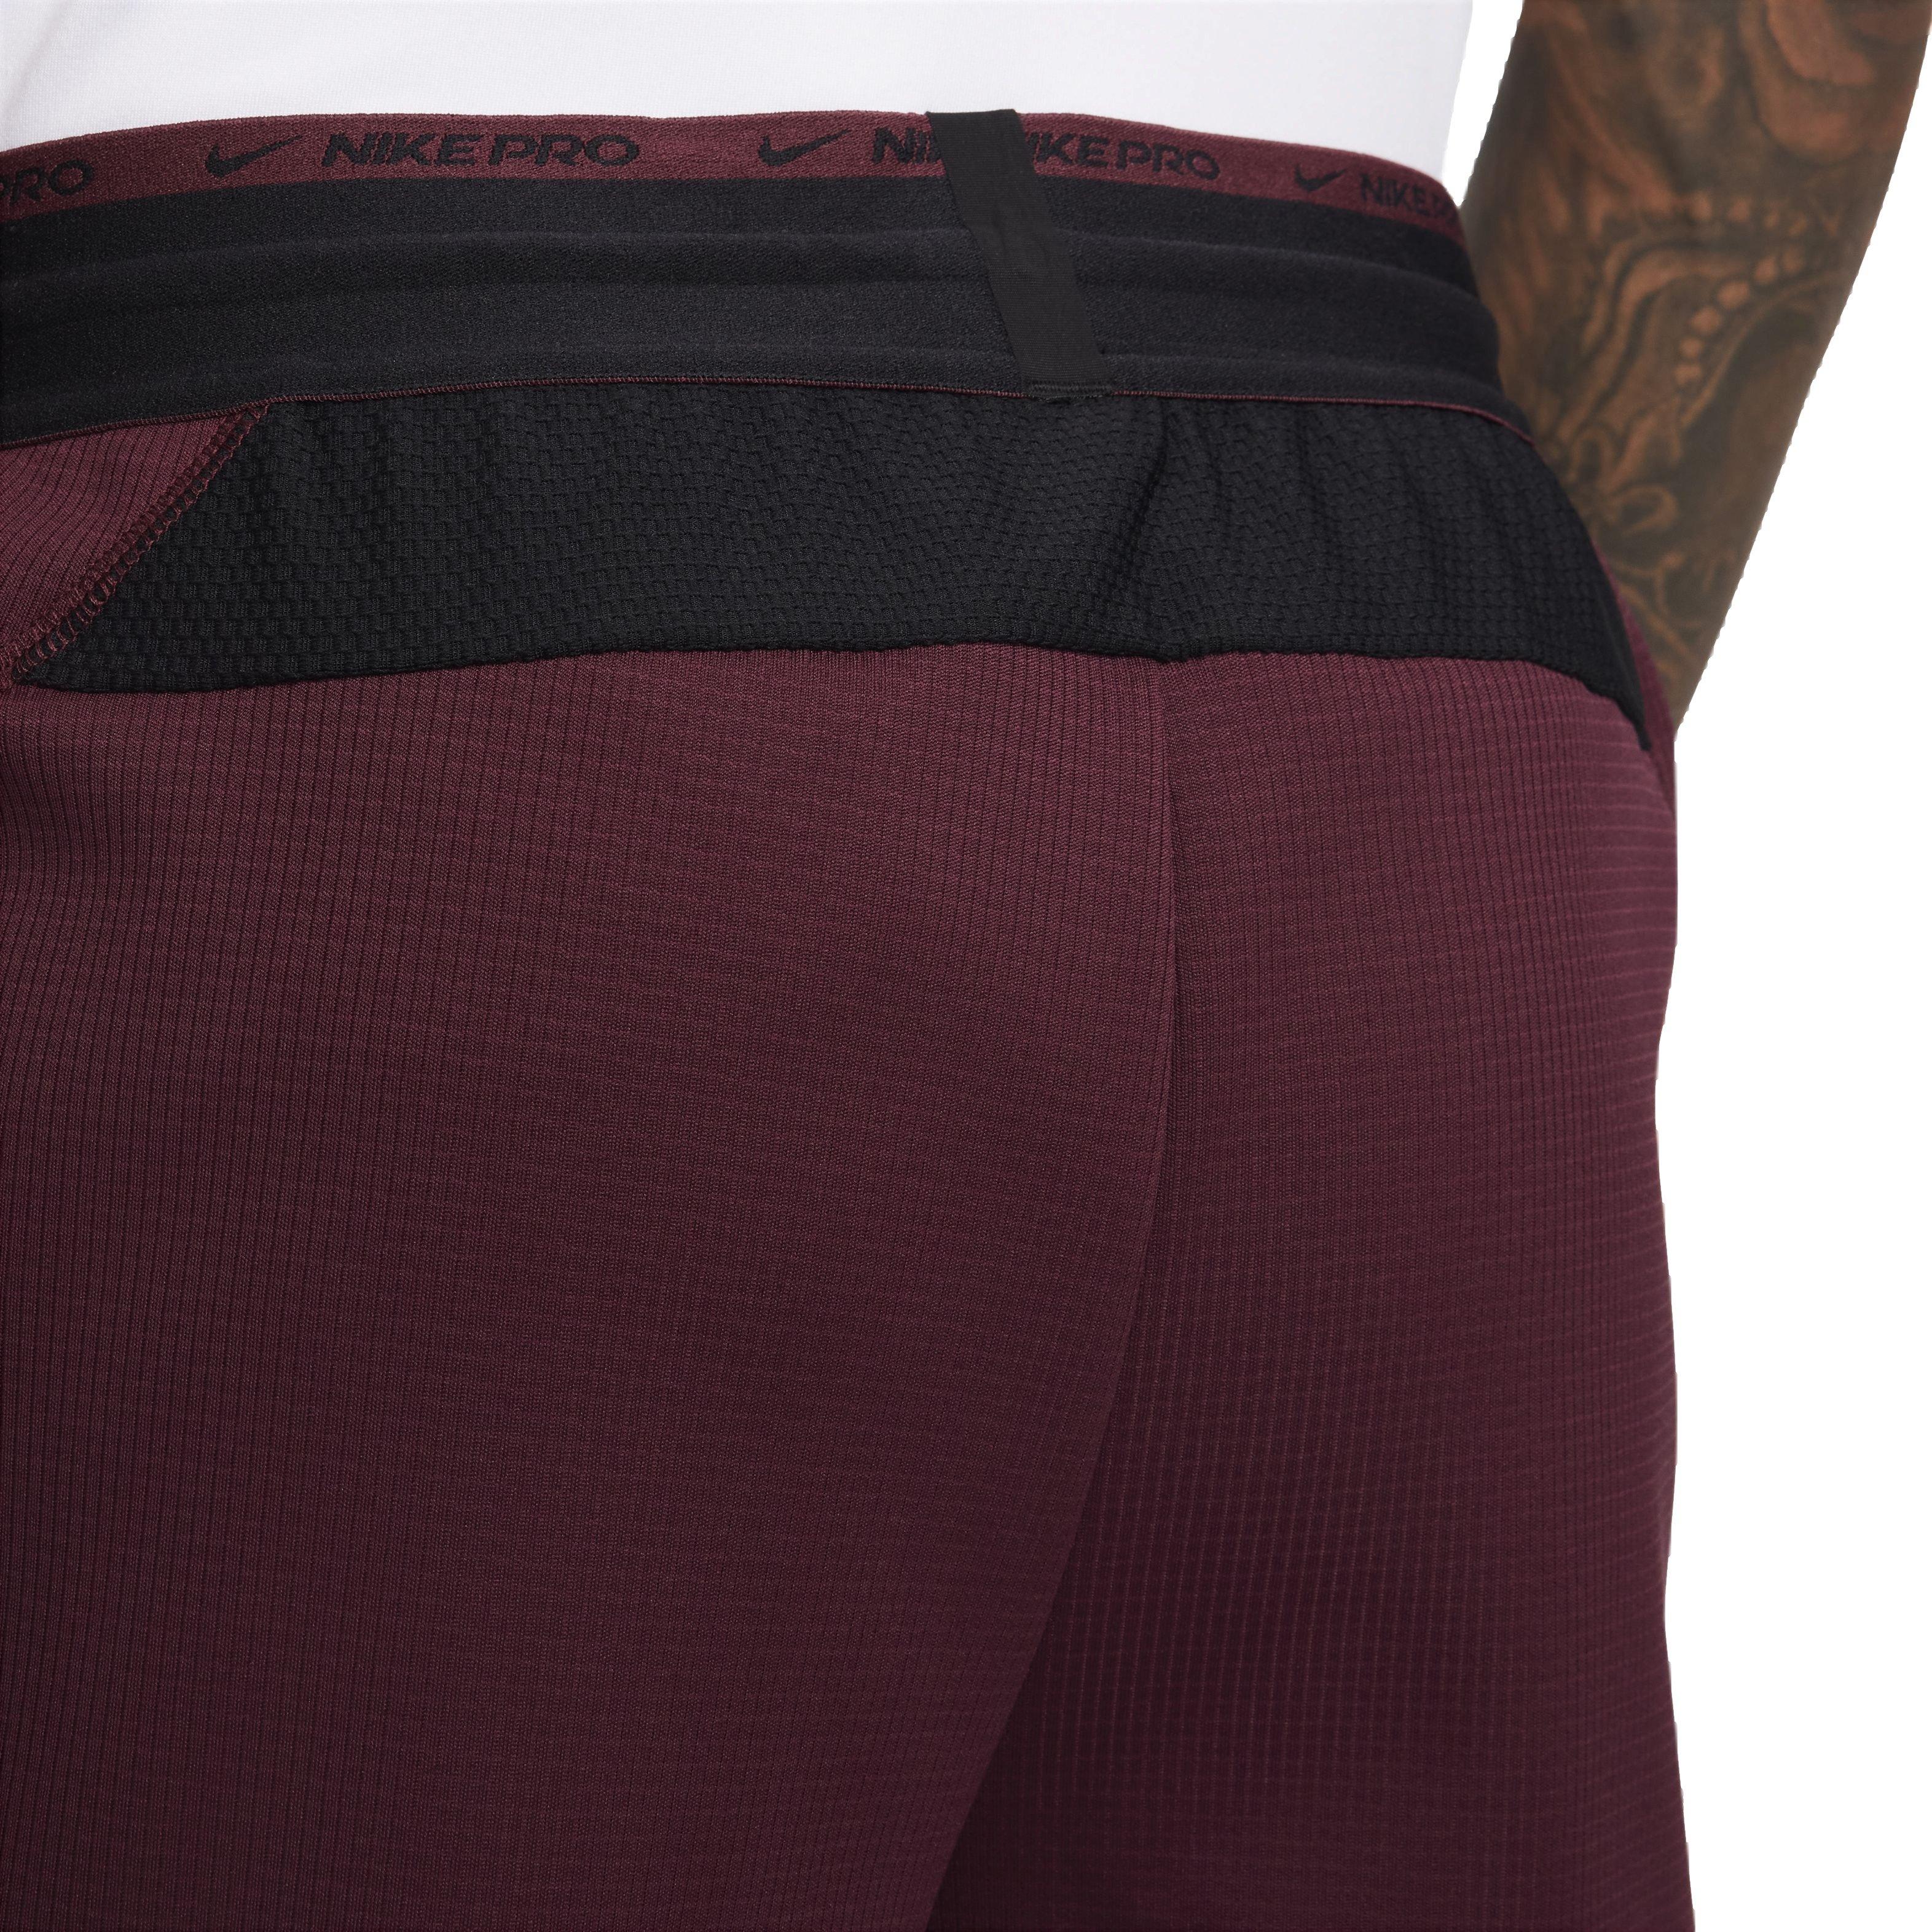 Nike Therma Sphere Men's Therma-FIT Fitness Pants